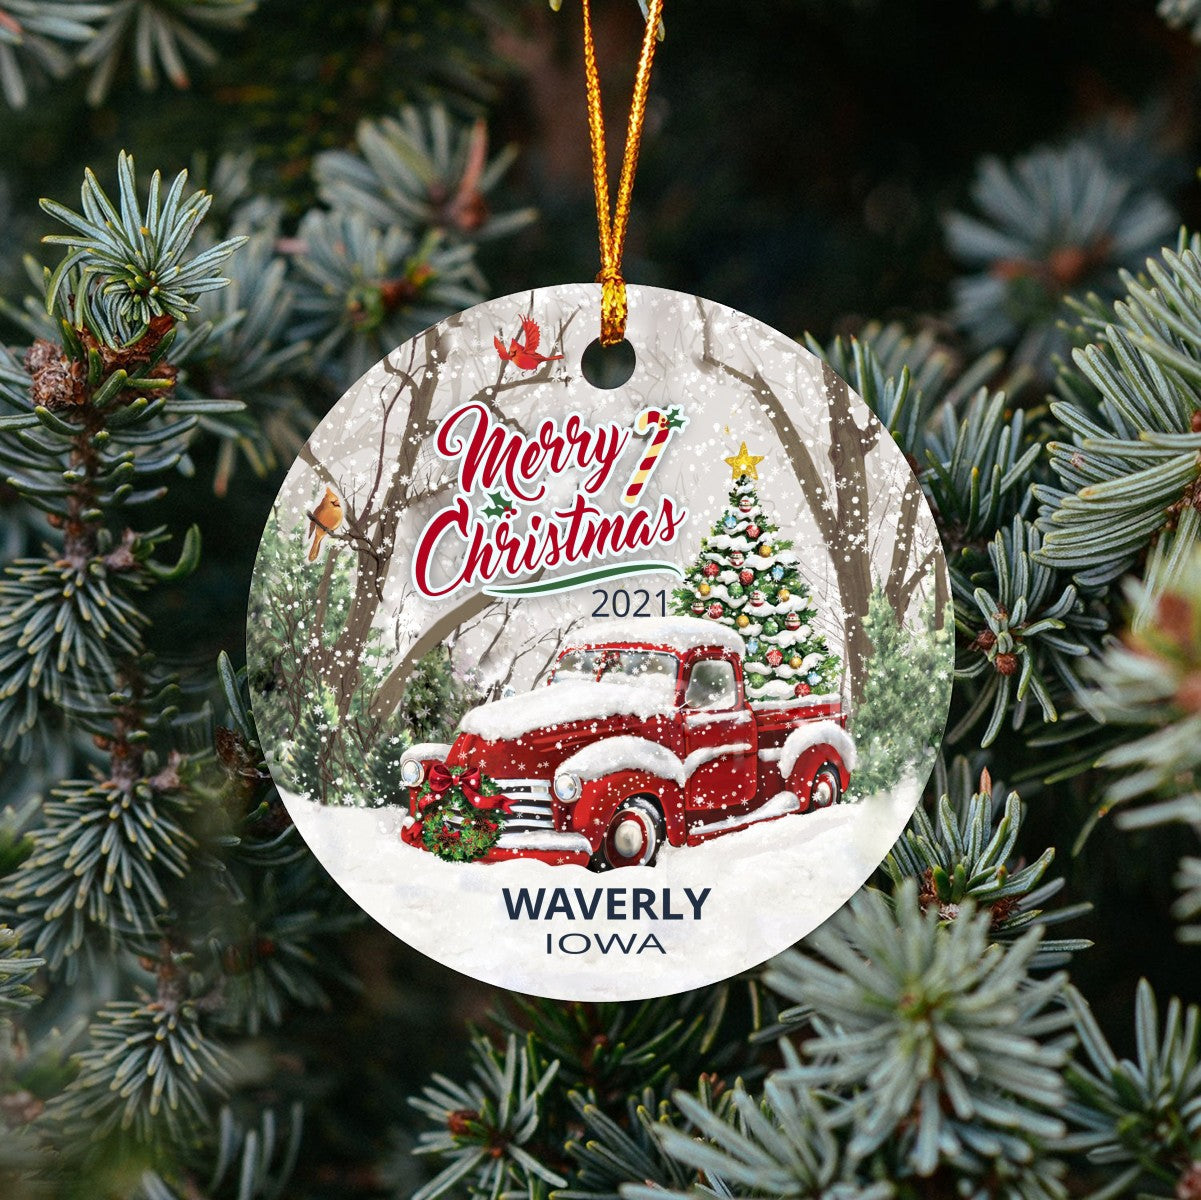 Christmas Tree Ornaments Waverly - Ornament With Name City, State Waverly Iowa IA Ornament - Red Truck Xmas Ornaments 3'' Plastic Gift For Family, Friend And Housewarming